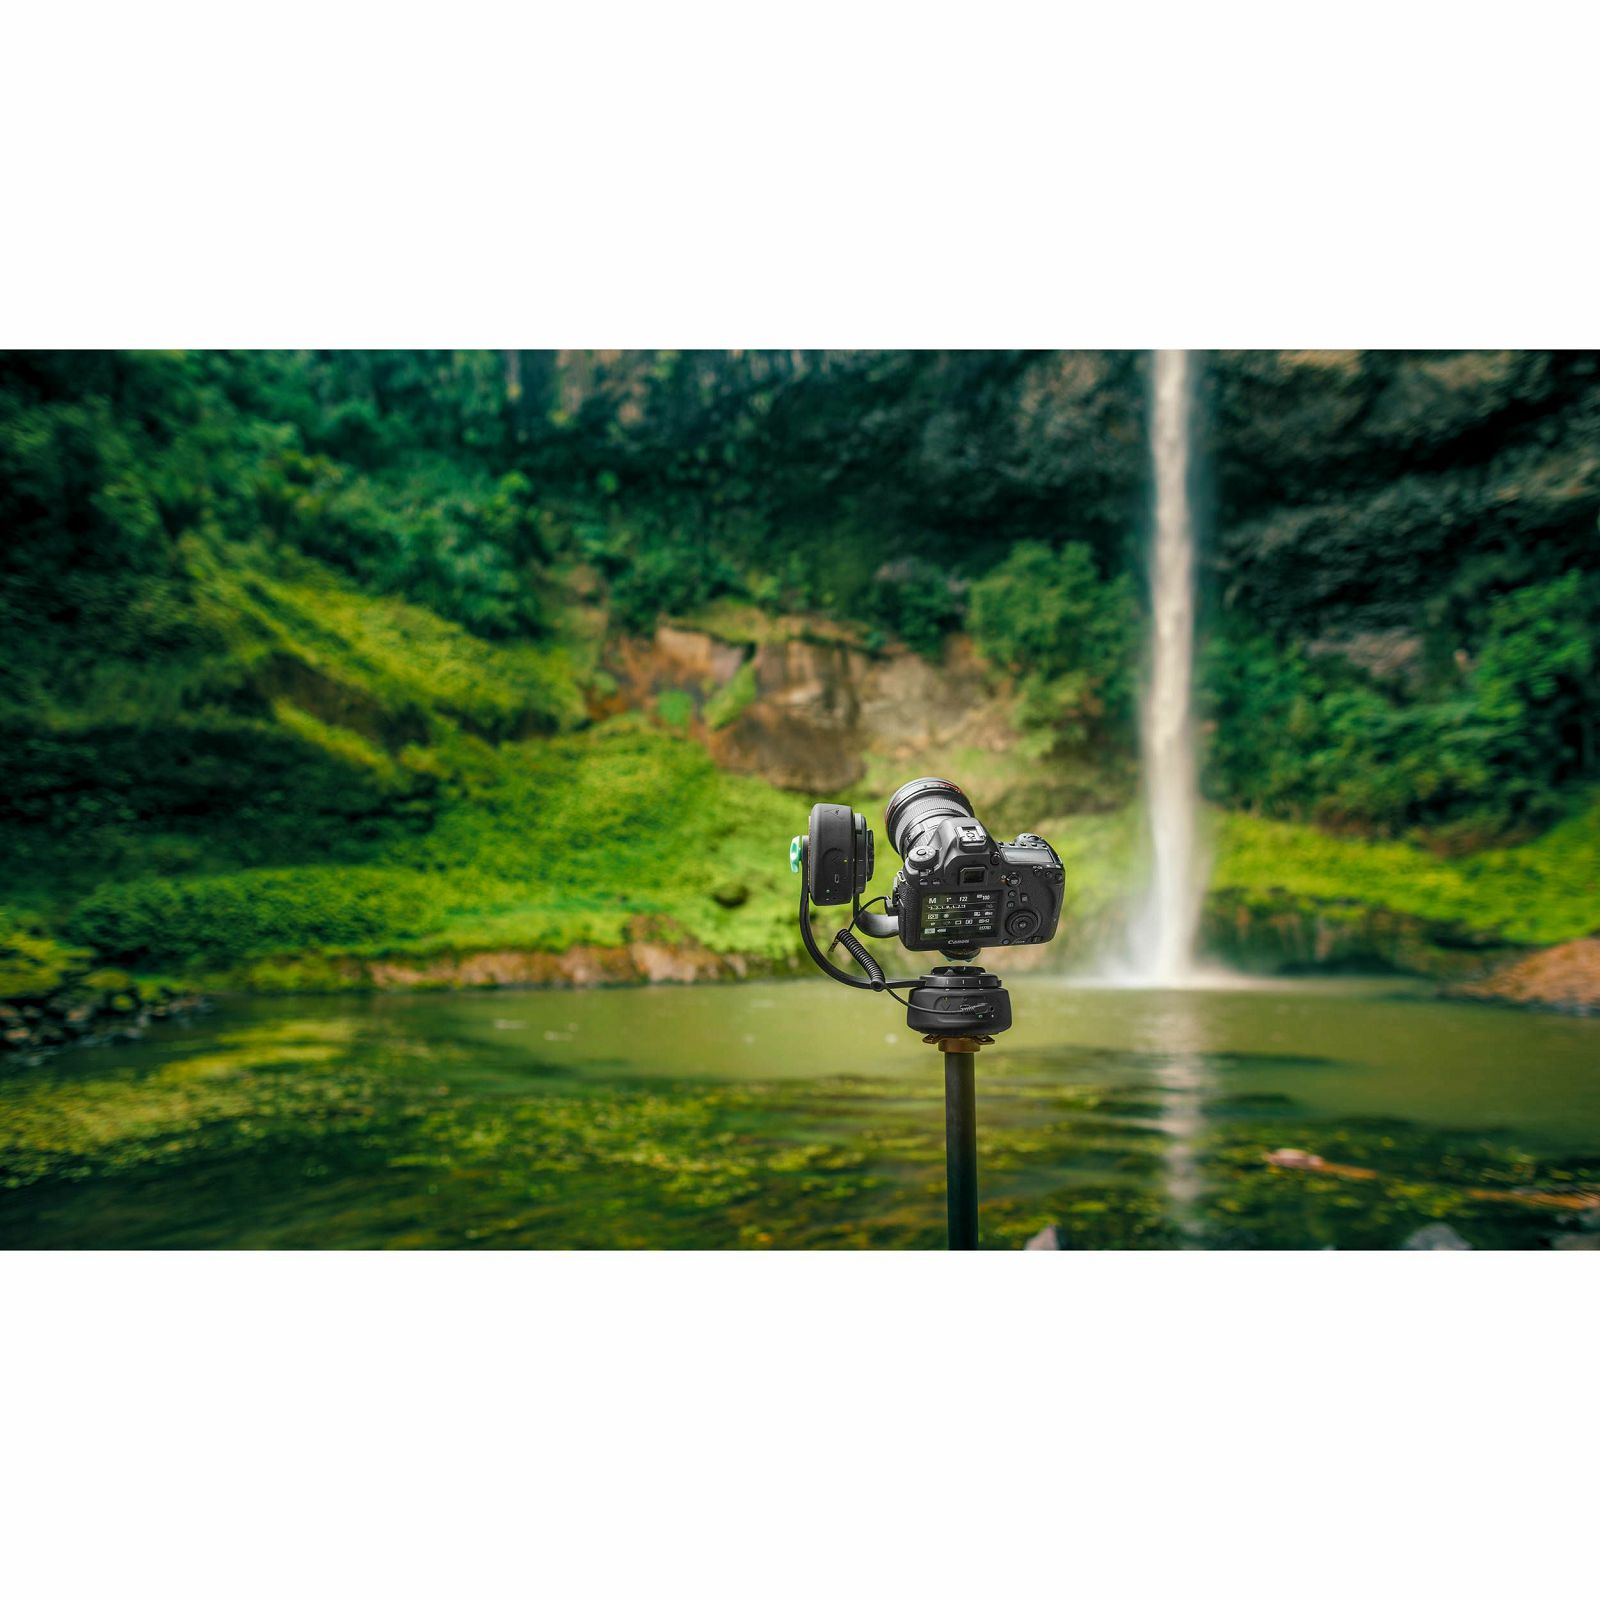 Syrp Pan Tilt Bracket for Genie and Genie Mini Enables 2-axis or 3-axis motion time-lapse and videos using a varied combination (0003-0001)